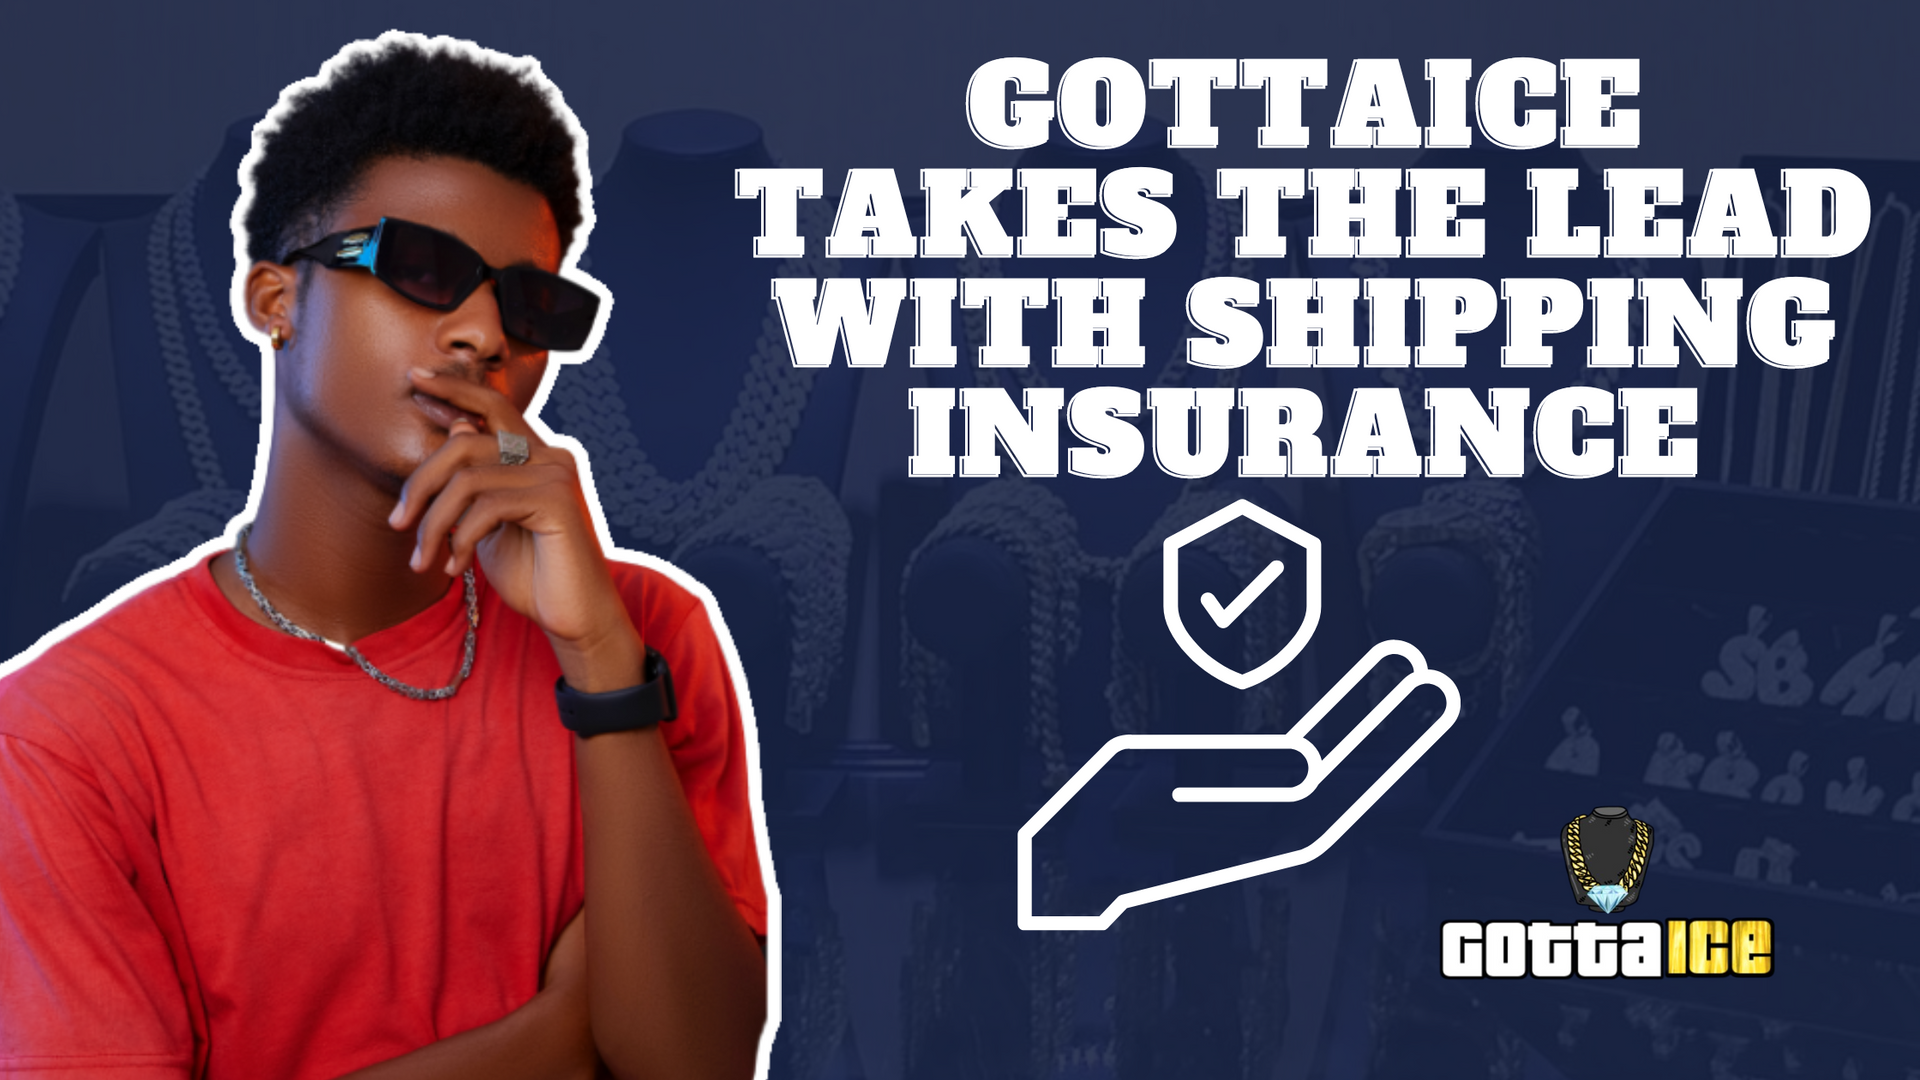 GottaIce Takes the Lead with Shipping Insurance | GottaIce